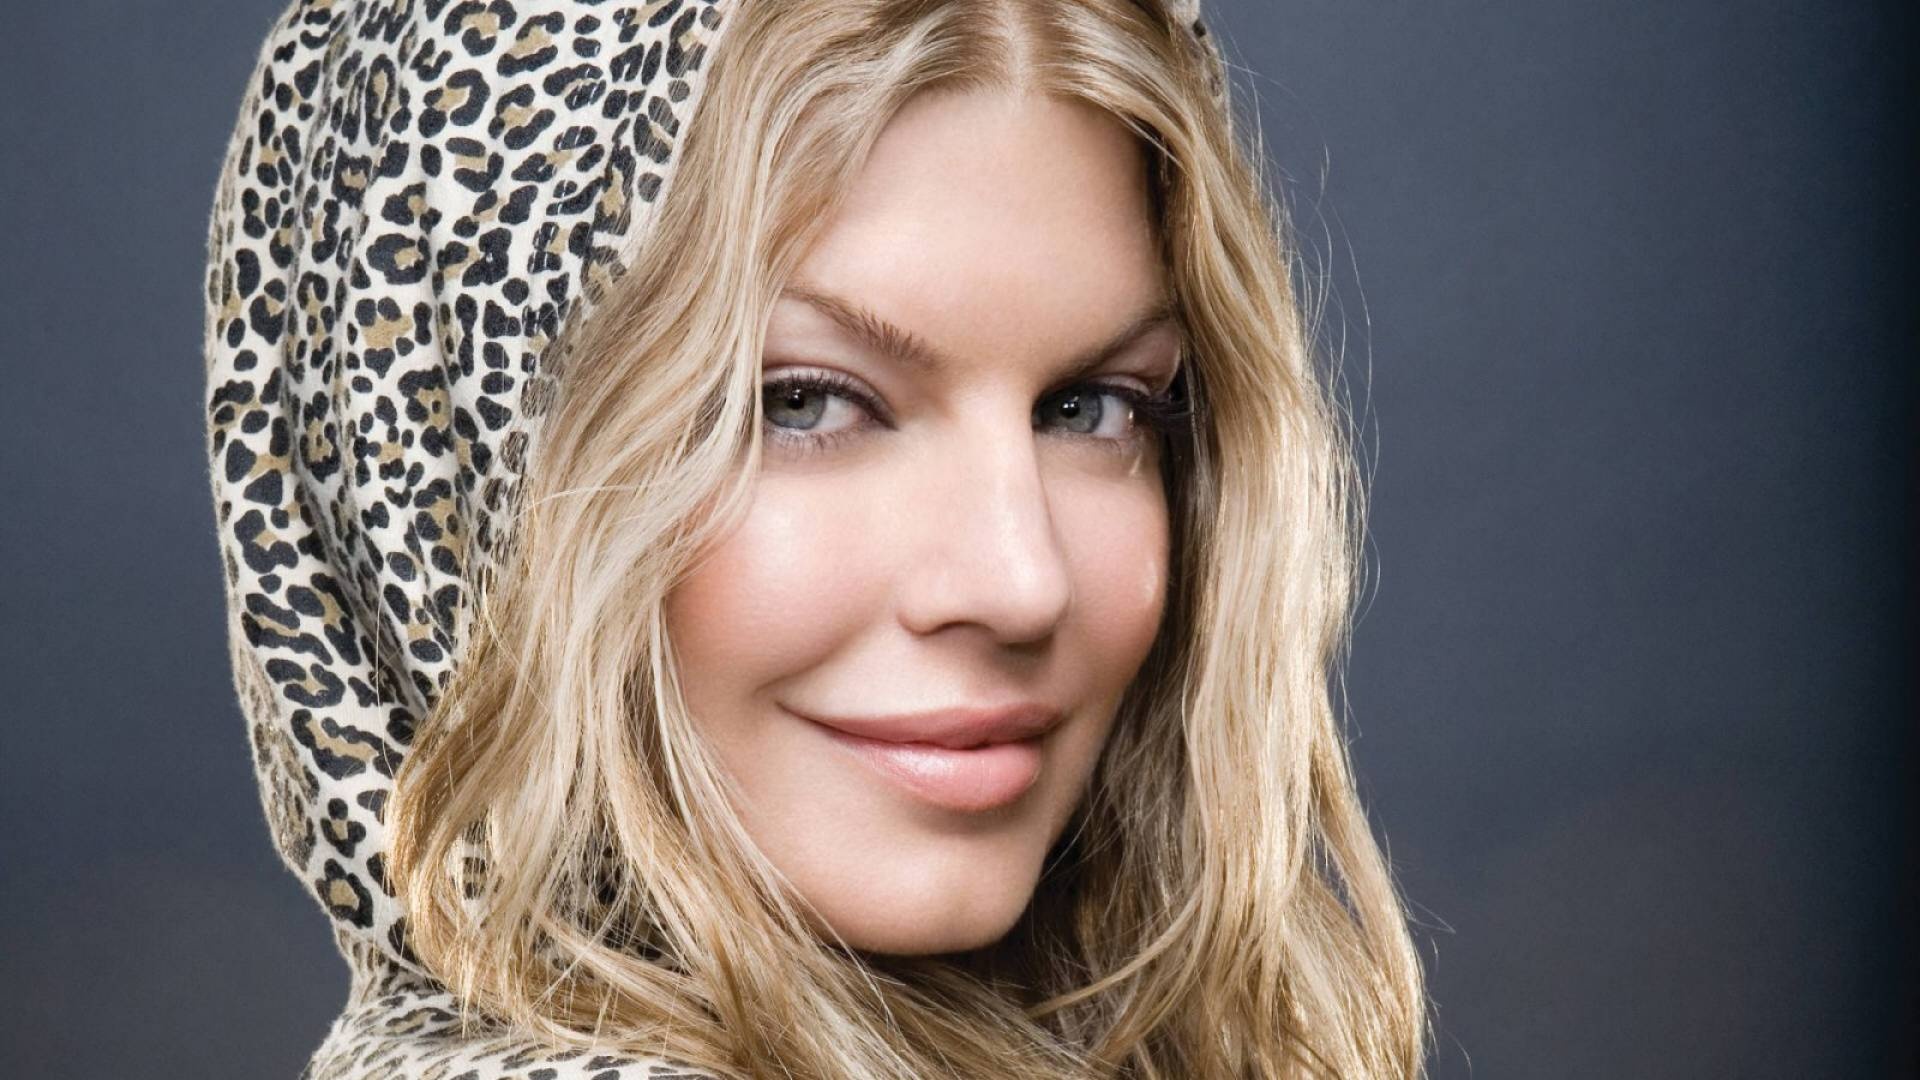 Fergie: Appeared as Saraghina in a 2009 romantic musical drama film, Nine. 1920x1080 Full HD Wallpaper.